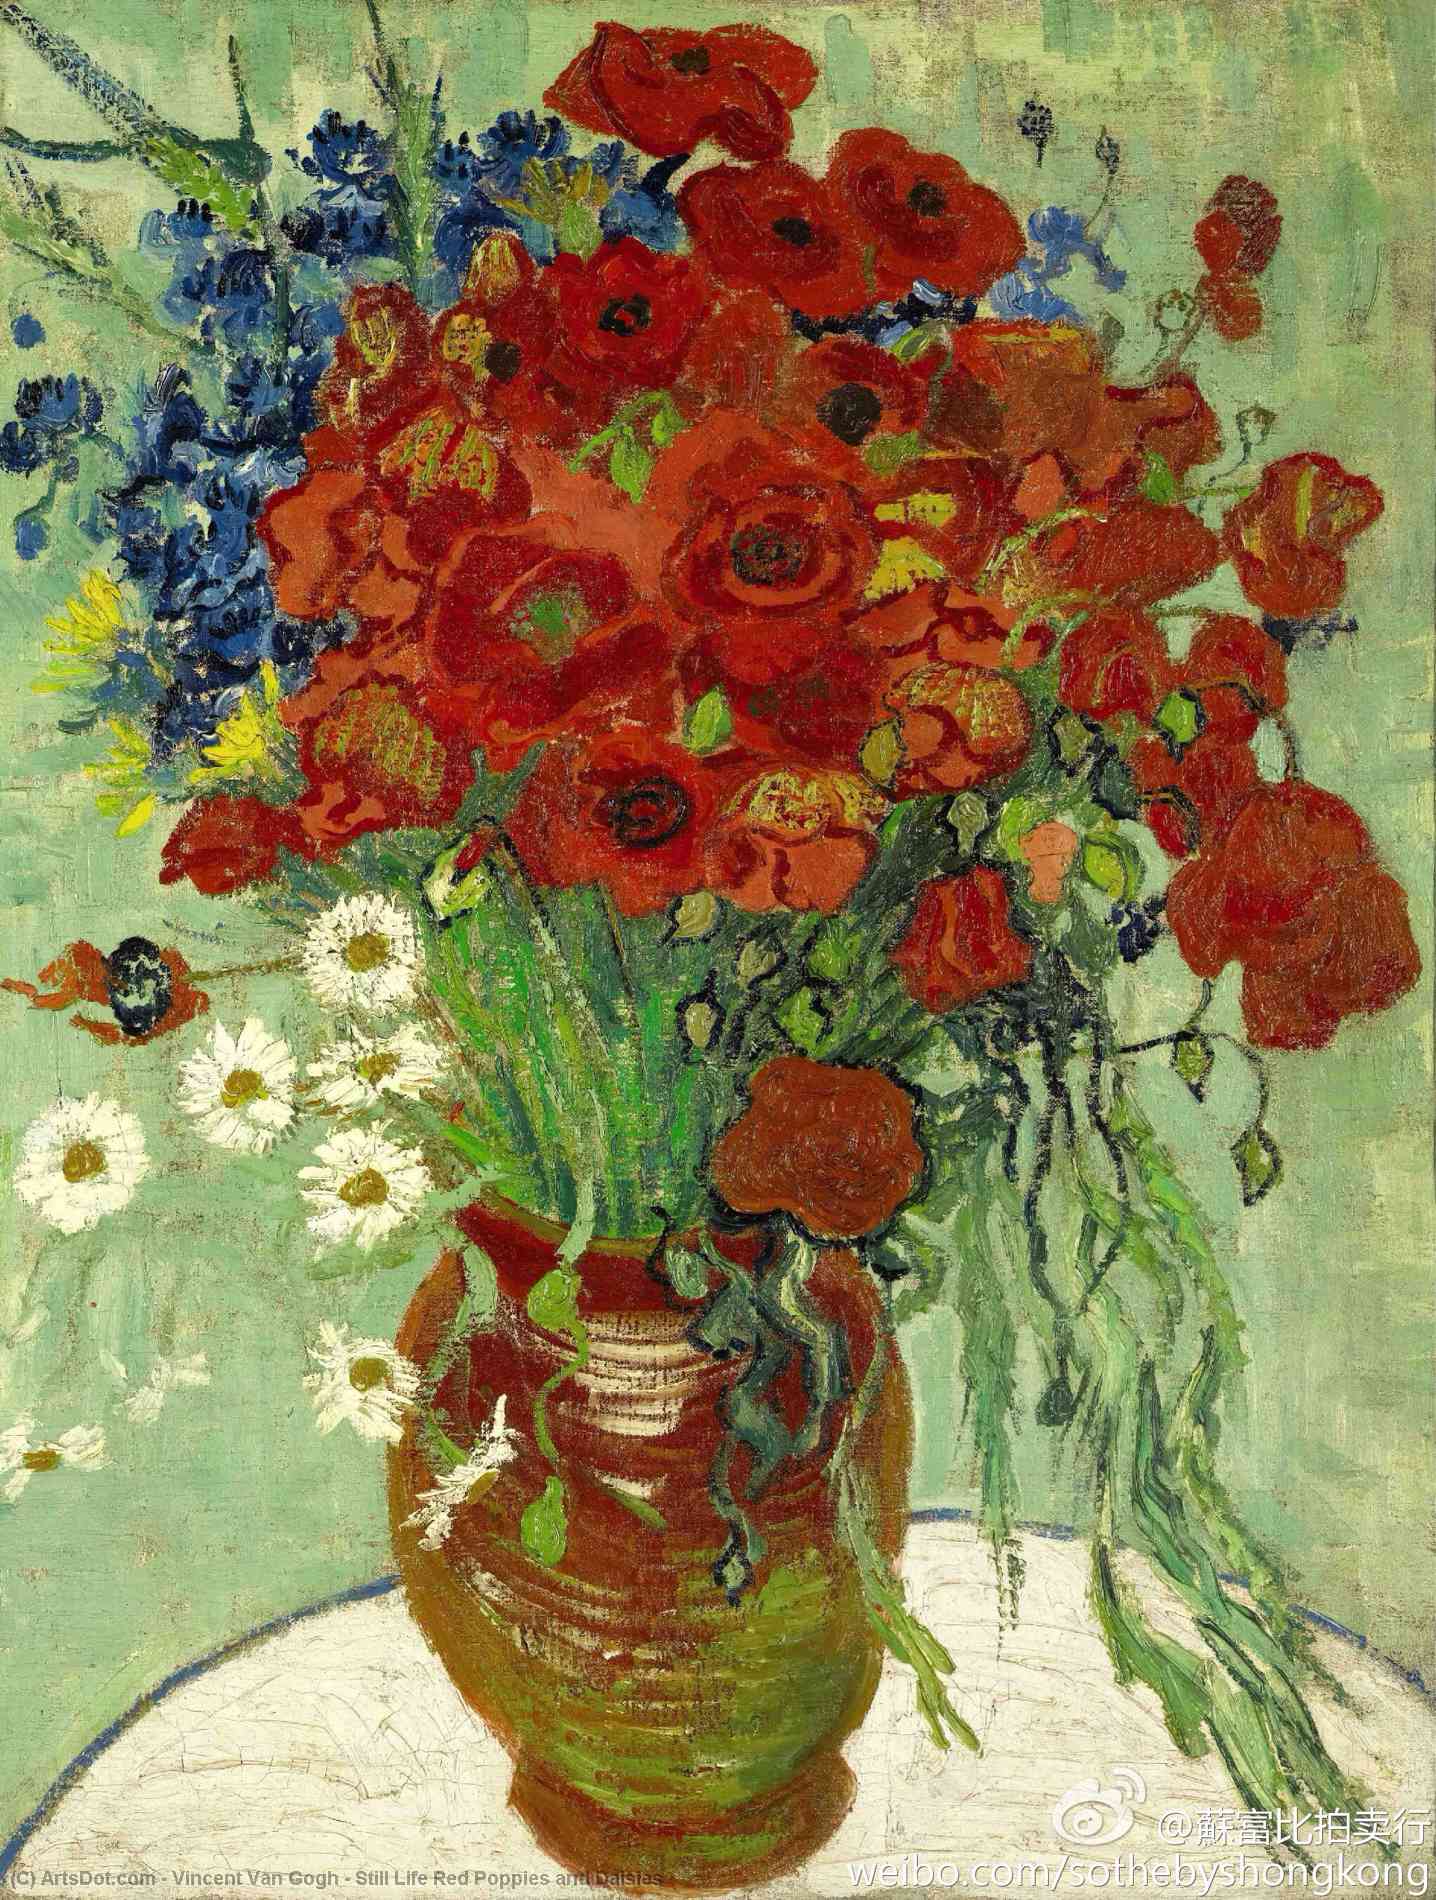 WikiOO.org - Encyclopedia of Fine Arts - Festés, Grafika Vincent Van Gogh - Still Life Red Poppies and Daisies